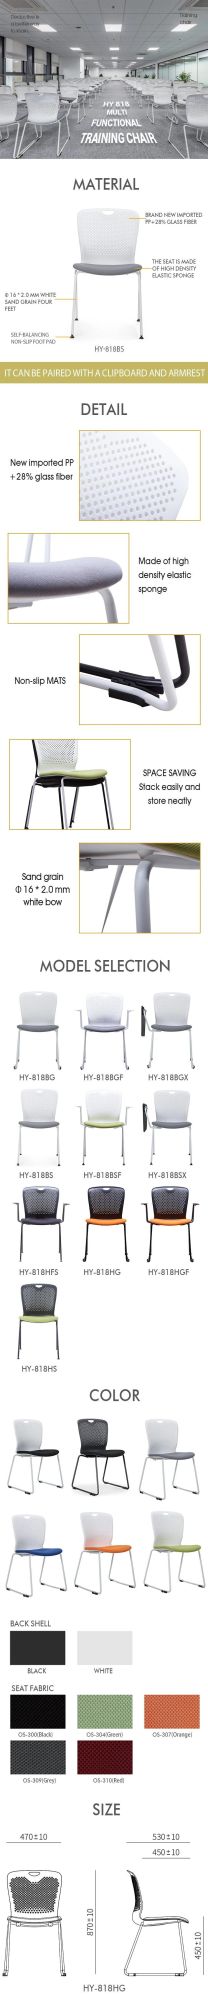 Office Furniture Plastic Chair with Metal Frame for Student/Meeting/Game